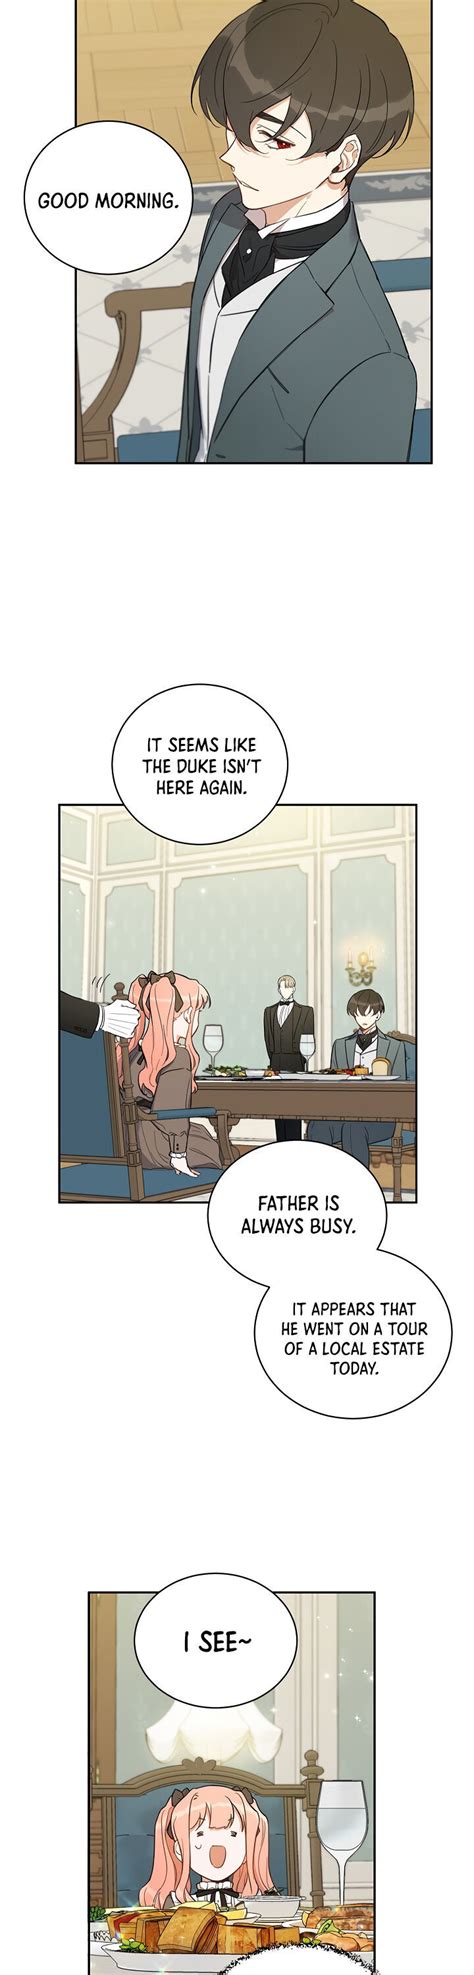 How to Be a Dark Hero’s Daughter - Chapter 5